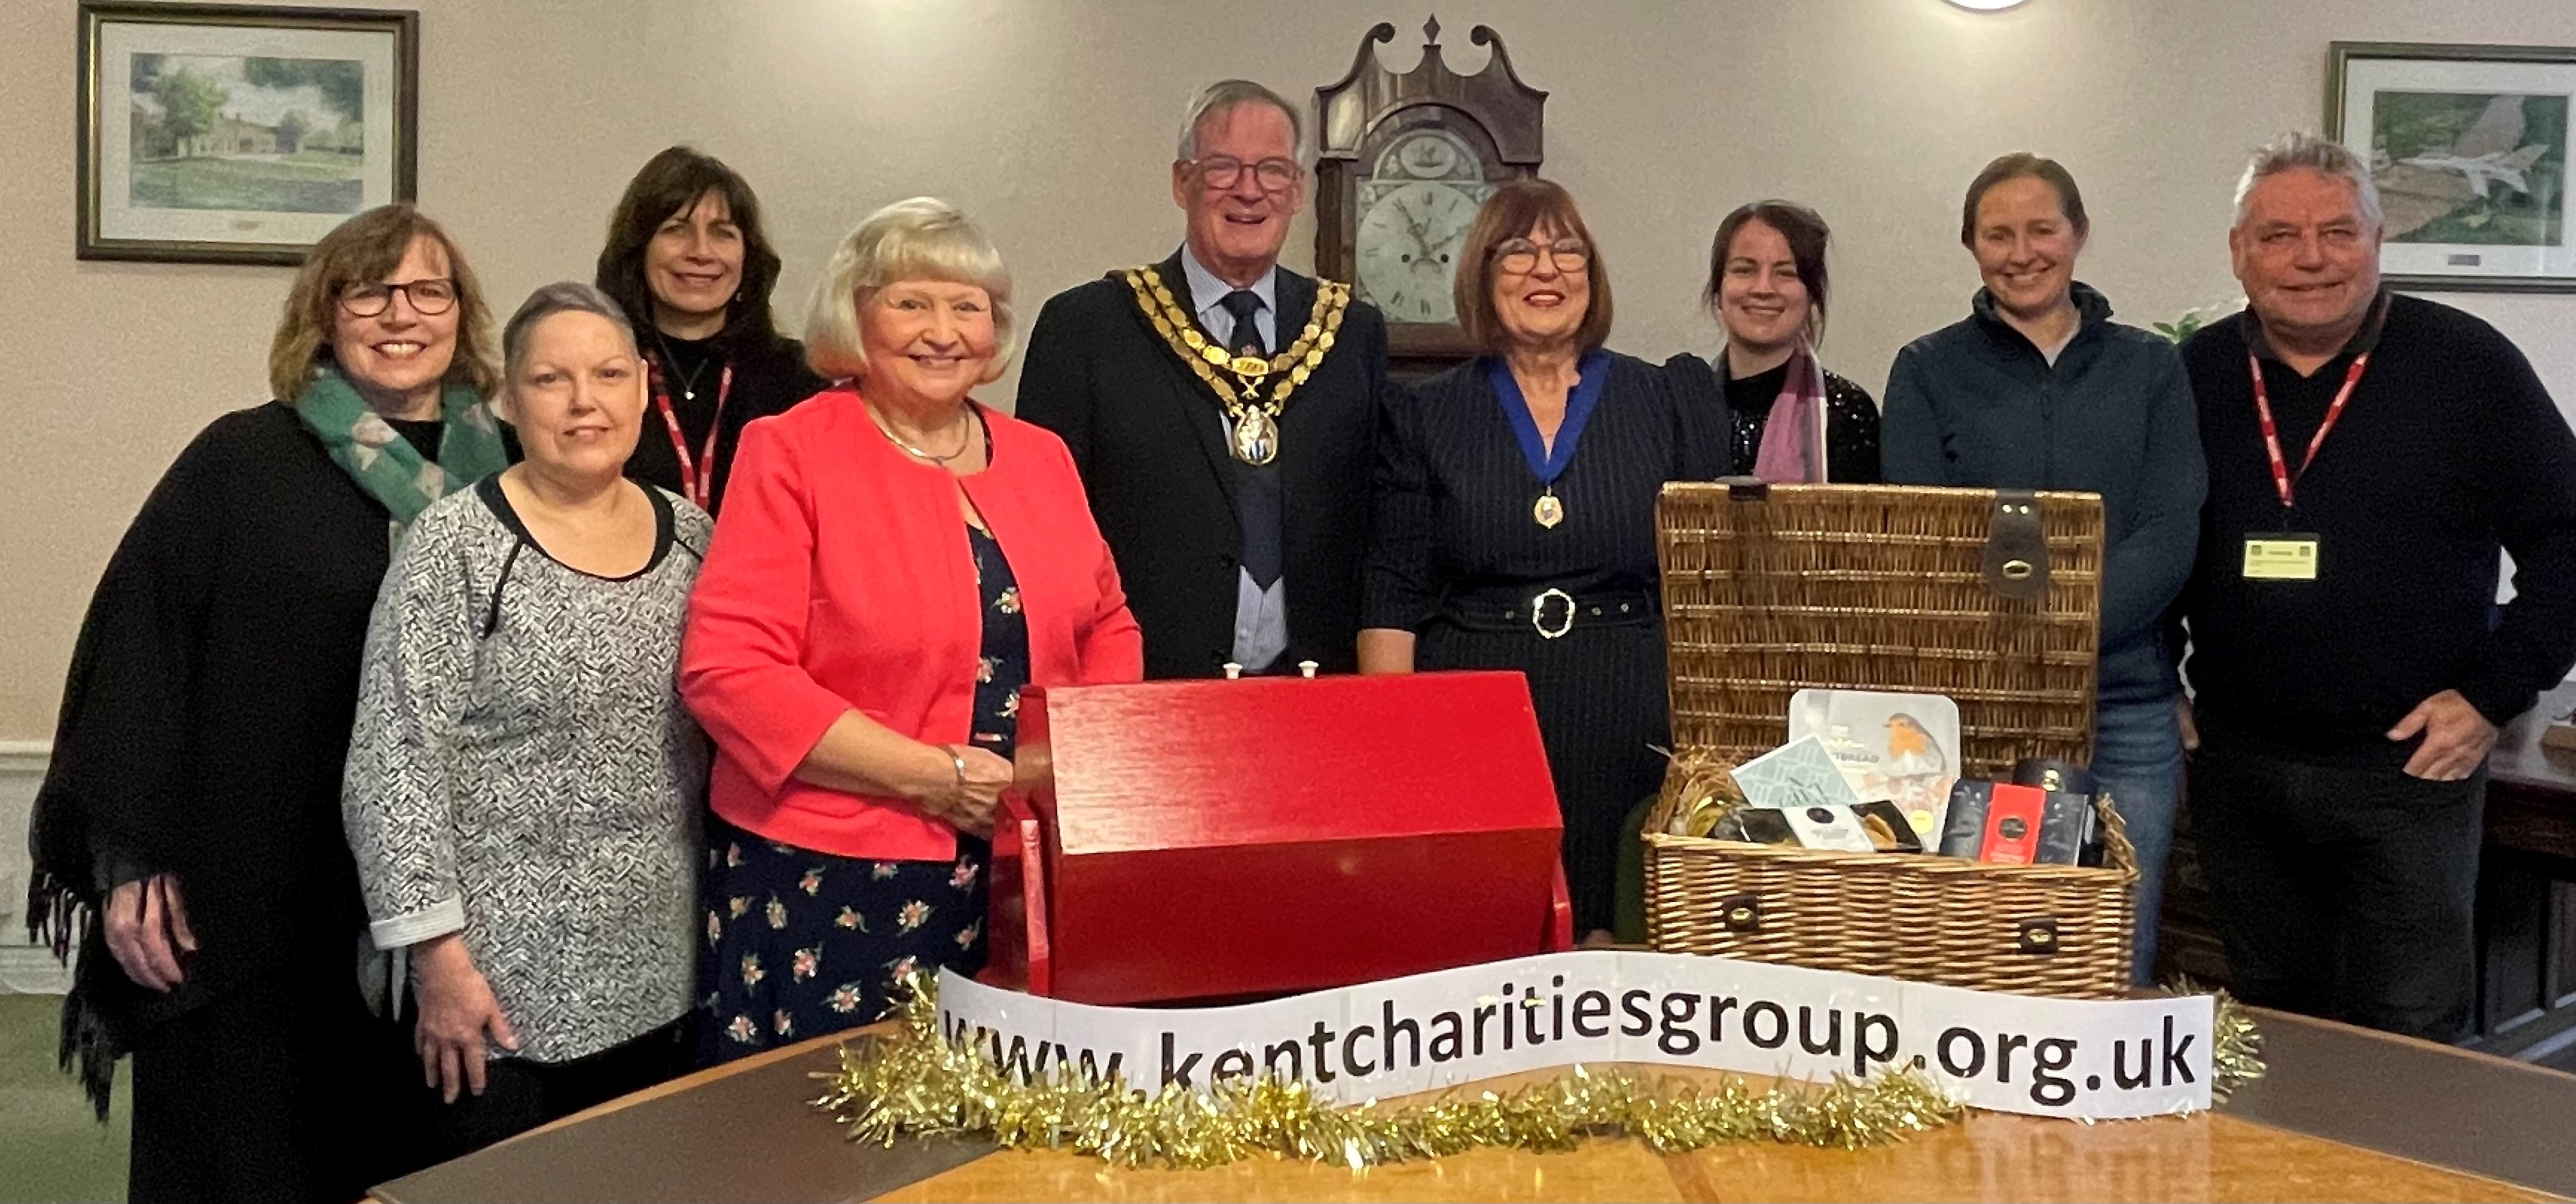 Kent Charities group standing together